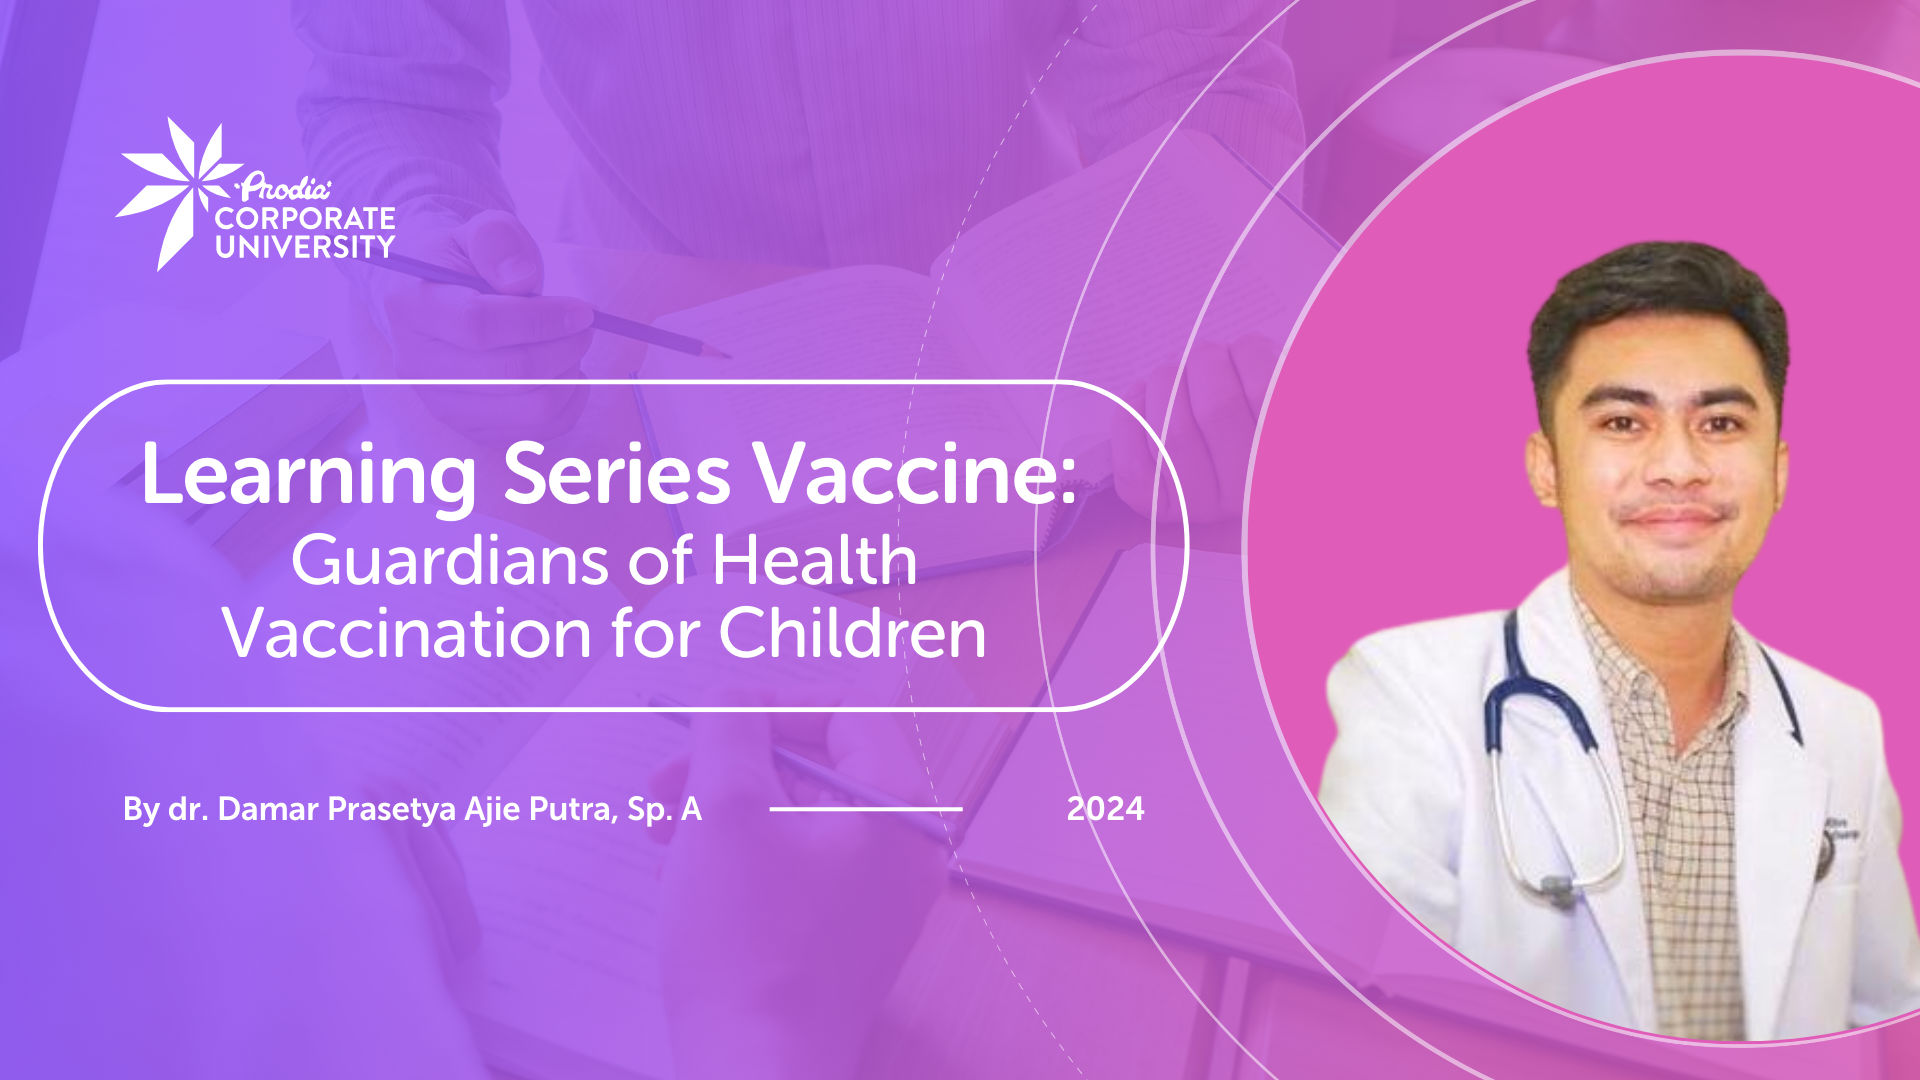 Learning Series Vaccine: Guardians of Health - Vaccination for Children